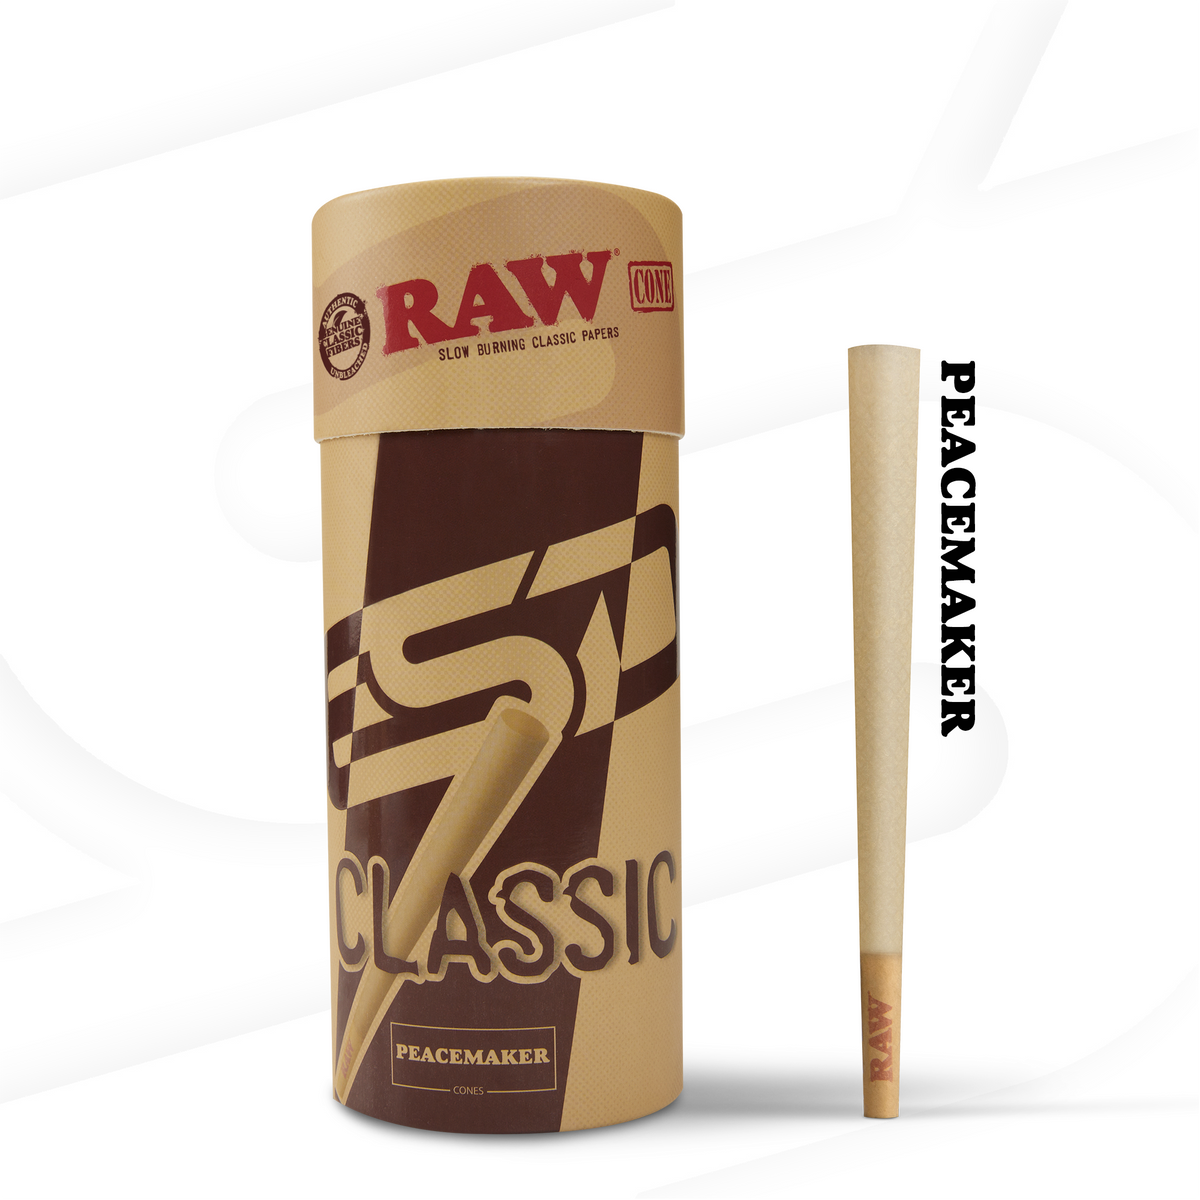 RAW Peacemaker Cones Classic | Larger than King Size RAW Cones RAWR-CNCL-PM01 esd-official